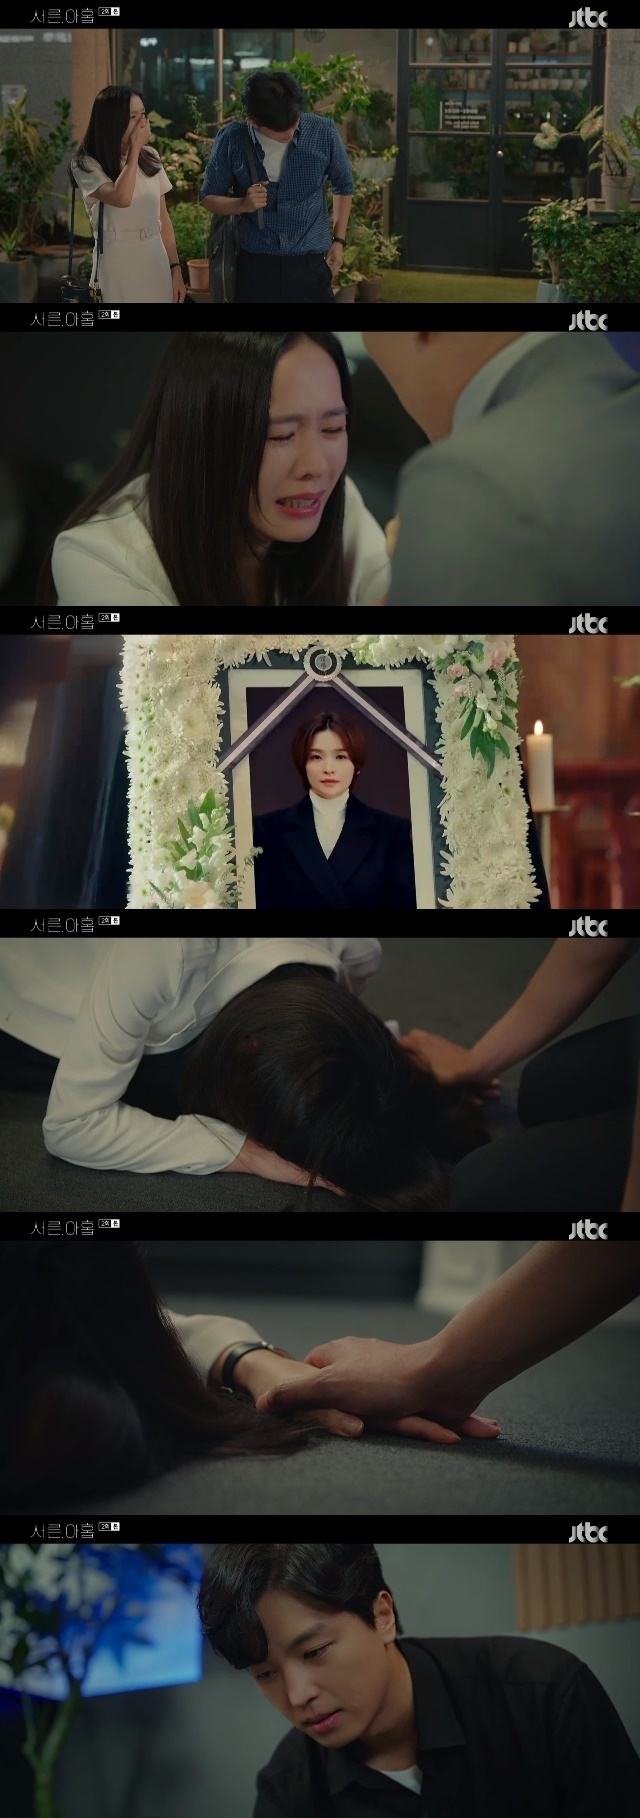 Son Ye-jin has been in a bad mood for Friend Jeun Mi-dos deadline decision.In the second episode of JTBCs Thirty, Nine (playplayed by Yoo Young-ah and directed by Kim Sang-ho), which was broadcast on February 17, dark clouds were formed in the friendships of Cha Mi-jo, Jeong Chan-young (Jeun Mi-do), and Jang Joo-hee (played by Kim Ji-hyun).On this day, Cha Mi-jo was reunited as a Sun-woo Kim (Yoon Woo-jin), a director of the Department of Dermatology, and a doctor who would take charge of the hospital for a year.Chamijo suggested to Sun-woo Kim that we are not in our 20s and that we may be an accident.However, Sun-woo Kim refused that the nights sleep was simply not an accident.Chung arranged his ambiguous relationship with Kim Jin-suk (this is life); Kim Jin-suk said of Chung Chan-young, Can you just quit smoking? Just quit smoking.It is hard to quit if both of them are cut off, he said, but Chung Chan-young refused to say, It is hard to do this. Chung Chan-young, however, mentioned the name of his son Joo Won (Ki Eun-yu) between Kim Jin-suk and Kang Sun-ju (Song Min-ji), saying, Lets live with Joo Won.I will do well, Kim Jin-suk said, indirectly, but Kim Jin-suk said that it is impossible to call Chung Chan-youngs name quietly.Oh, Im bad. Lets make a single parent. Im crazy, Chung said.Kim Jin-suk came back to Chung Chan-young and shook him. Kim Jin-suk suggested to Chung Chan-young that he would like to study more.Then, Chung Chan-young said, I am right about my brother. I want to buy a cigarette again because of my brother.Chung Chan-young said, I was so long ago. Kim Jin-suk threw the study documents into the trash.Jang Joo-hee looked at Park Hyun-joon (Lee Tae-hwan), the president of the new China town in the neighborhood.On his way home, Jang Joo-hee pointed to the sleeping green light between him and Park Hyun-joon when he approached him intimately and recommended a service tasting.However, Jang Joo-hee stopped by Park Hyun-joons shop to show Park Hyun-joon to Cha Mi-jo and Chung Chan-young, and then witnessed a young woman Friend.When the three of them started a bitter bottle of high-yield liquor, Sun-woo Kim entered Park Hyun-joons store, which was between Sun-woo Kim and Park Hyun-joons brother.Chung Chan-young proposed to Sun-woo Kim on behalf of Cha Mi-jo, when his fathers phone call came to Cha Mi-jo.Sun-woo Kim was called to his father with a drink and rushed to his car to his home.After that, Cha Mi-jo went to the main house and spent a lot of time with his family on United States of America.This process revealed that Chamijo is trying to have a one-year sabbatical due to panic disorder.The next day, Kim Jin-suk came back to Chung Chan-youngs house. Kim Jin-suk said, Will our actors keep watching?Actors who are filming now are responsible, he caught Chung Chan-young and got an inevitable permission from Chung Chan-young. Kim Jin-suk also took Chung Chan-youngs meal.Chung Chan-young was forced to be dragged by Kim Jin-suk and appealed, My brother is indecisive, but only two are decisive. Actor management, I live in front of Chung Chan-young.Cha Mi-jo lent his car to Sun-woo Kim, saying he would pay his last debt when he was in a situation where he could not use his personal car and had to rent it.The opponent Sun-woo Kim borrowed Cha Mi-jos car and met his brother, Hope (An So-hee), who told Sun-woo Kim, Do you know my father?I am no longer my brothers brother, he said, suggesting a family history. The two also mentioned a dead mother.When Sun-woo Kim returned to the hospital, Chamijo remained in the hospital; Chamijo offered Sun-woo Kim a glass of wine.Sun-woo Kim said, My brother left the house, suddenly went to Korea, so I came here to Korea, I saw the national view, and I came here to the hospital.His name is Hope. I love Hopey so much, and suddenly shes different. Maybe shes been shaking a little since she died.I was organizing to make a sale, he said.My sister is the homework that I have to solve in Korea, Chamijo said briefly. My family is good and I live well, but I am always anxious about my life.My brother may have a similar mind, so it may be a bit of a rebellion, he said, representing Kim Hopes mind in the adoptive childs gaze.Sun-woo Kim said, Thank you for taking out it because it would be hard to say.Chamijo brought up the one-stand ahead of the conversation, and Chamijo said, I was sick of the accident. I am unfamiliar with telling my story to anyone.Never. But why are you talking to Sunwoo. I think it was. He said he adopted his brother there. Youre a good guy.So that day, anyway, the point is not an accident. Sun-woo Kim said, I wanted to take Mizo from the time I first saw him, when I was standing with a peony. They laughed together at first sight.Sun-woo Kim, who has become more favorable to Chamijo, told Chamijo, You have to go, United States of America?How about playing that golf here? I can play it five times to Weekend if I have two days in the hospital and three times a week.Sun-woo Kim said, Why do not you understand yourself? My life was so quiet, but you appeared and stuck.Its been ten years, and its United States of America. Im Confessions now. Can I like it?Sun-woo Kim replied to Chamijo, who seemed too drunk, I will break the drink and I will be Confessions again.After returning home, Chamijo thought of Sun-woo Kim throughout, and Sun-woo Kim, who had a little drink, regretted it.The next day, Sun-woo Kim revealed his mind again by putting the peony he had bought from the morning in Chamijos office.Sun-woo Kim said, Yesterdays unsatisfactory Confessions, and Cha Mi-jo could not hide his smile, even though people have no context.But Chamijos smile didnt last long: I had a health checkup with Chung Chan-young and Jang Joo-hee through a close senior ahead of a years sabbatical, and the results came out.Chamijo was shocked by the result notification and hurried out of the hospital without changing clothes.And what I could hear from my senior who was in a hurry was that the illness of a friend had already progressed to the fourth stage.Chamijo chased Kim Jin-suk and ran out his resentment, saying, Youre going to kill me, Kim Jin-suk, this bad XX, because of you.Sun-woo Kim, who was visiting Kim Jin-suk, looked at this in shock.